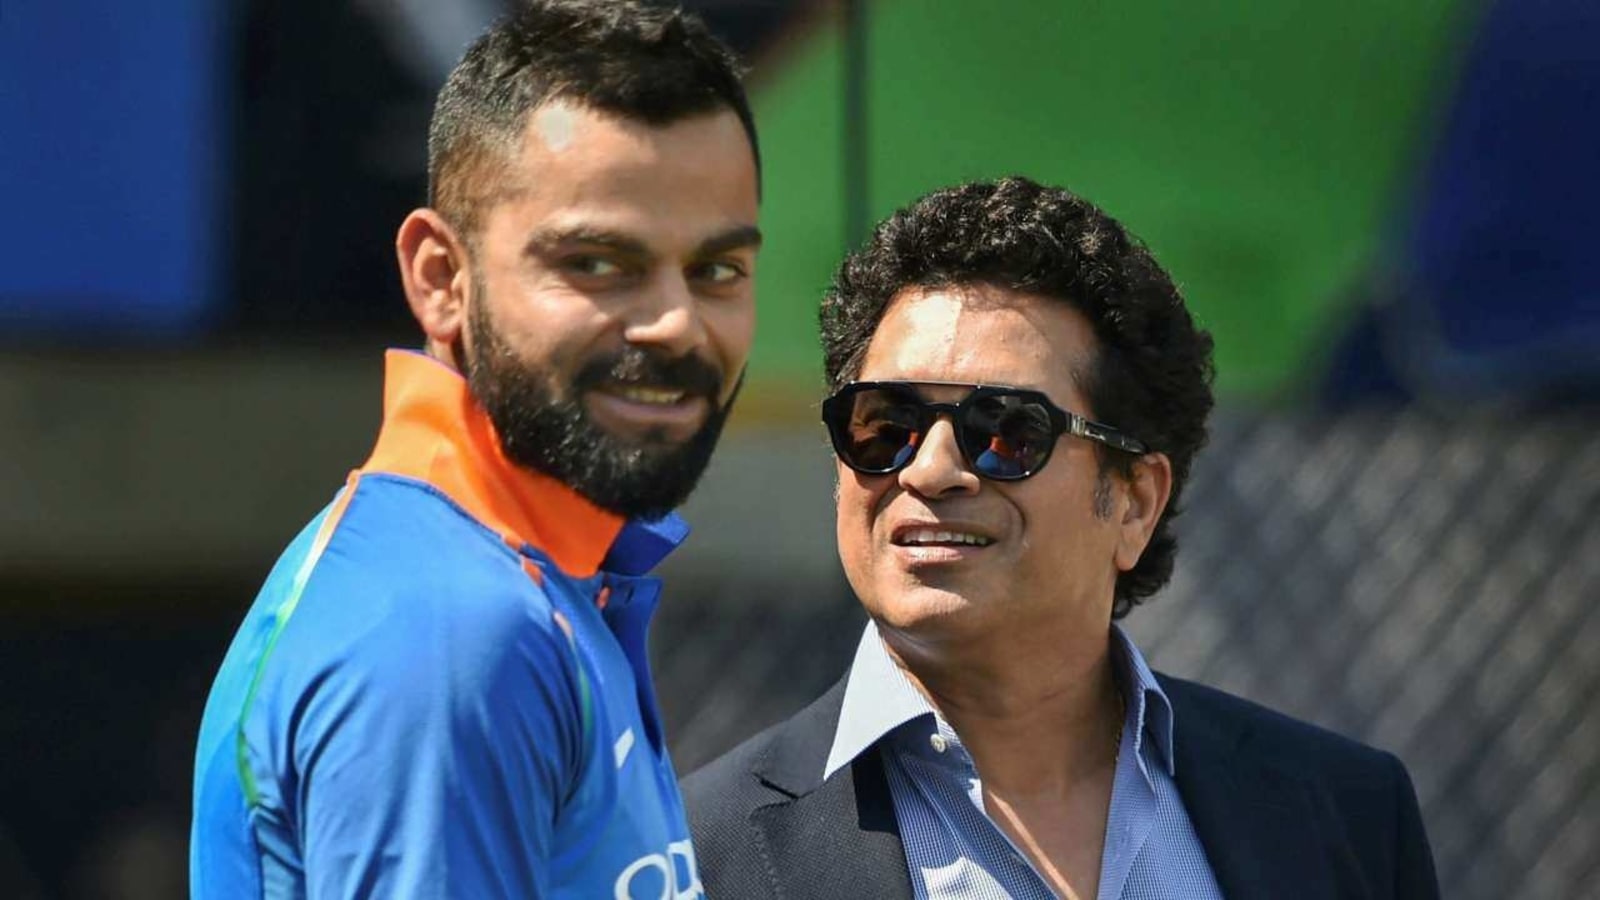 Told him such things don't happen: Tendulkar recalls hilarious first  interaction with Kohli | Cricket - Hindustan Times